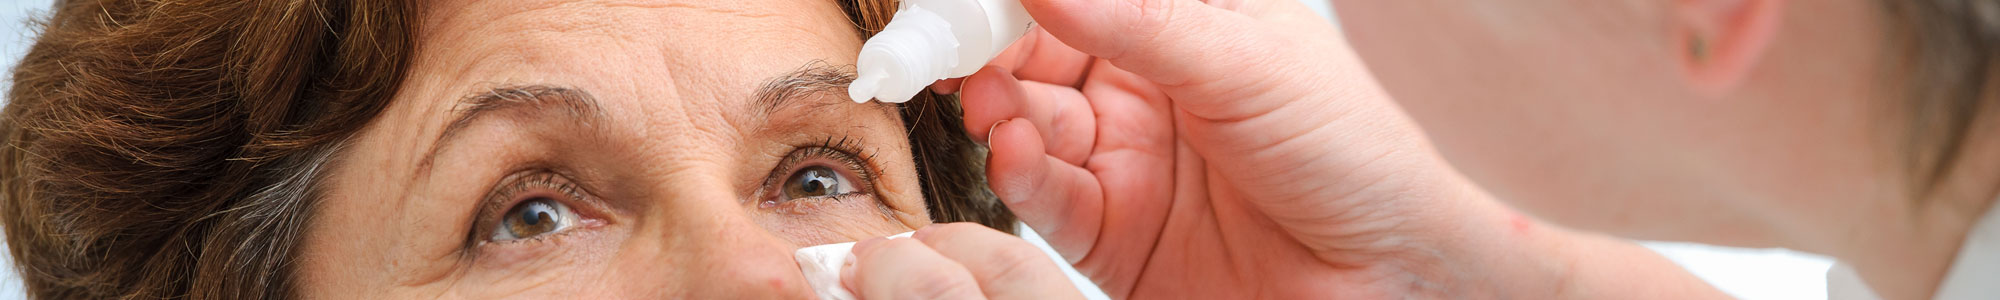 Woman being treated for dry eye with eye drops 